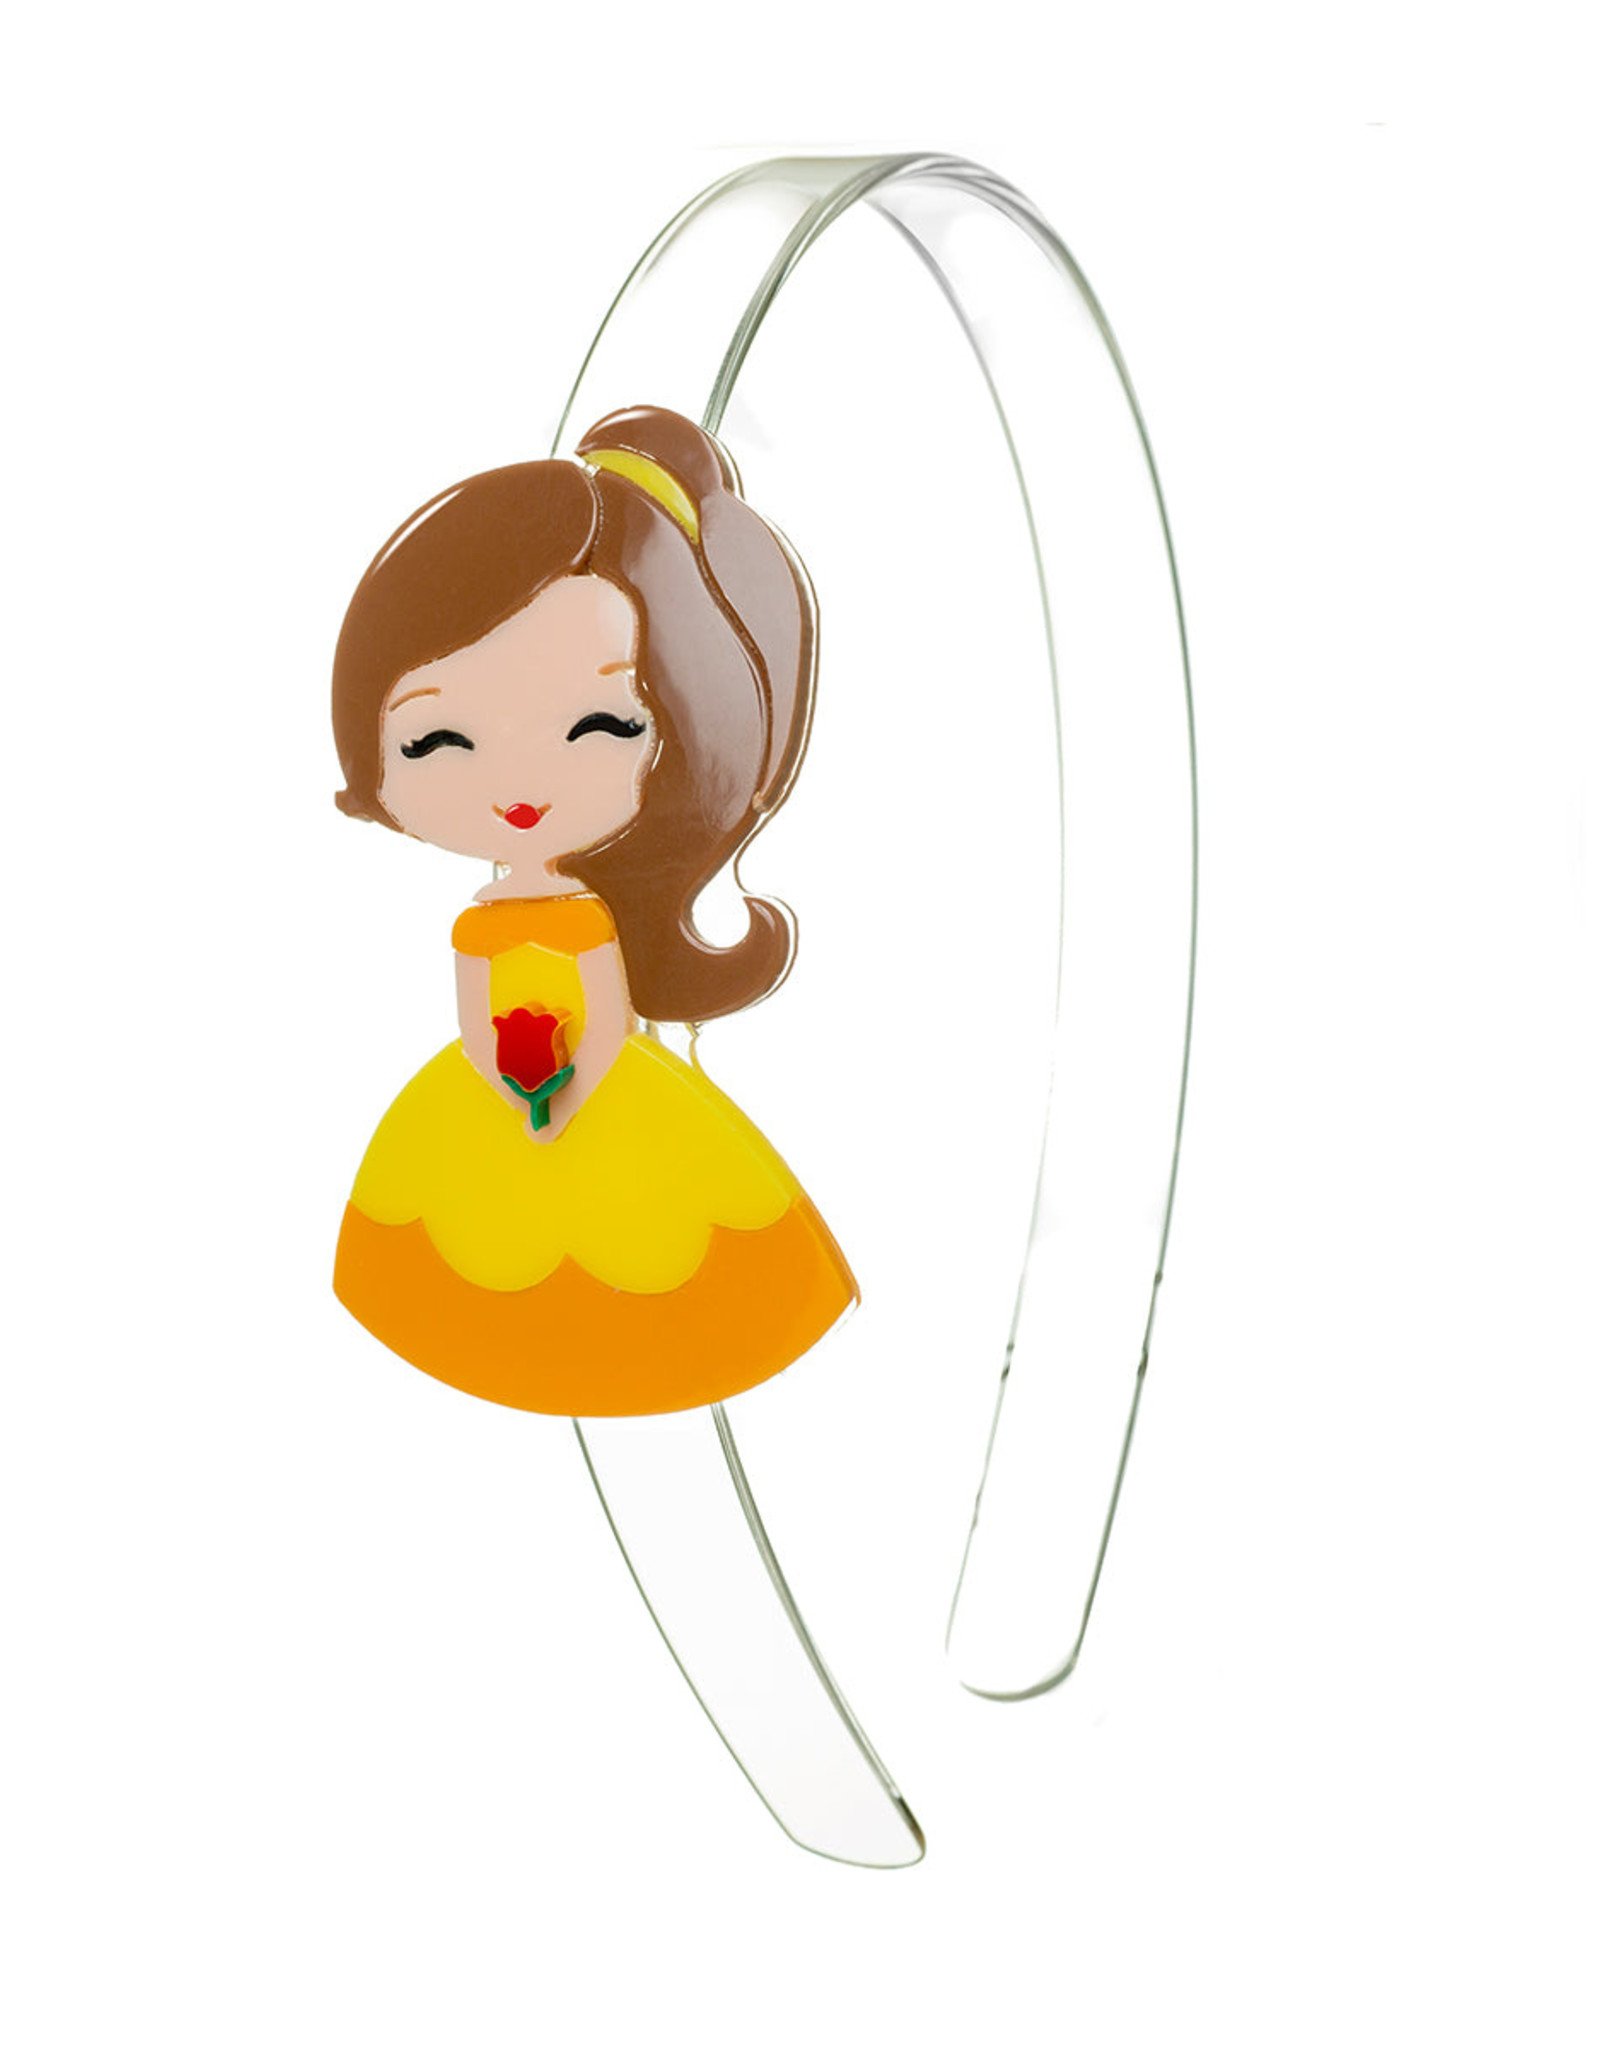 yellow clothes clipart